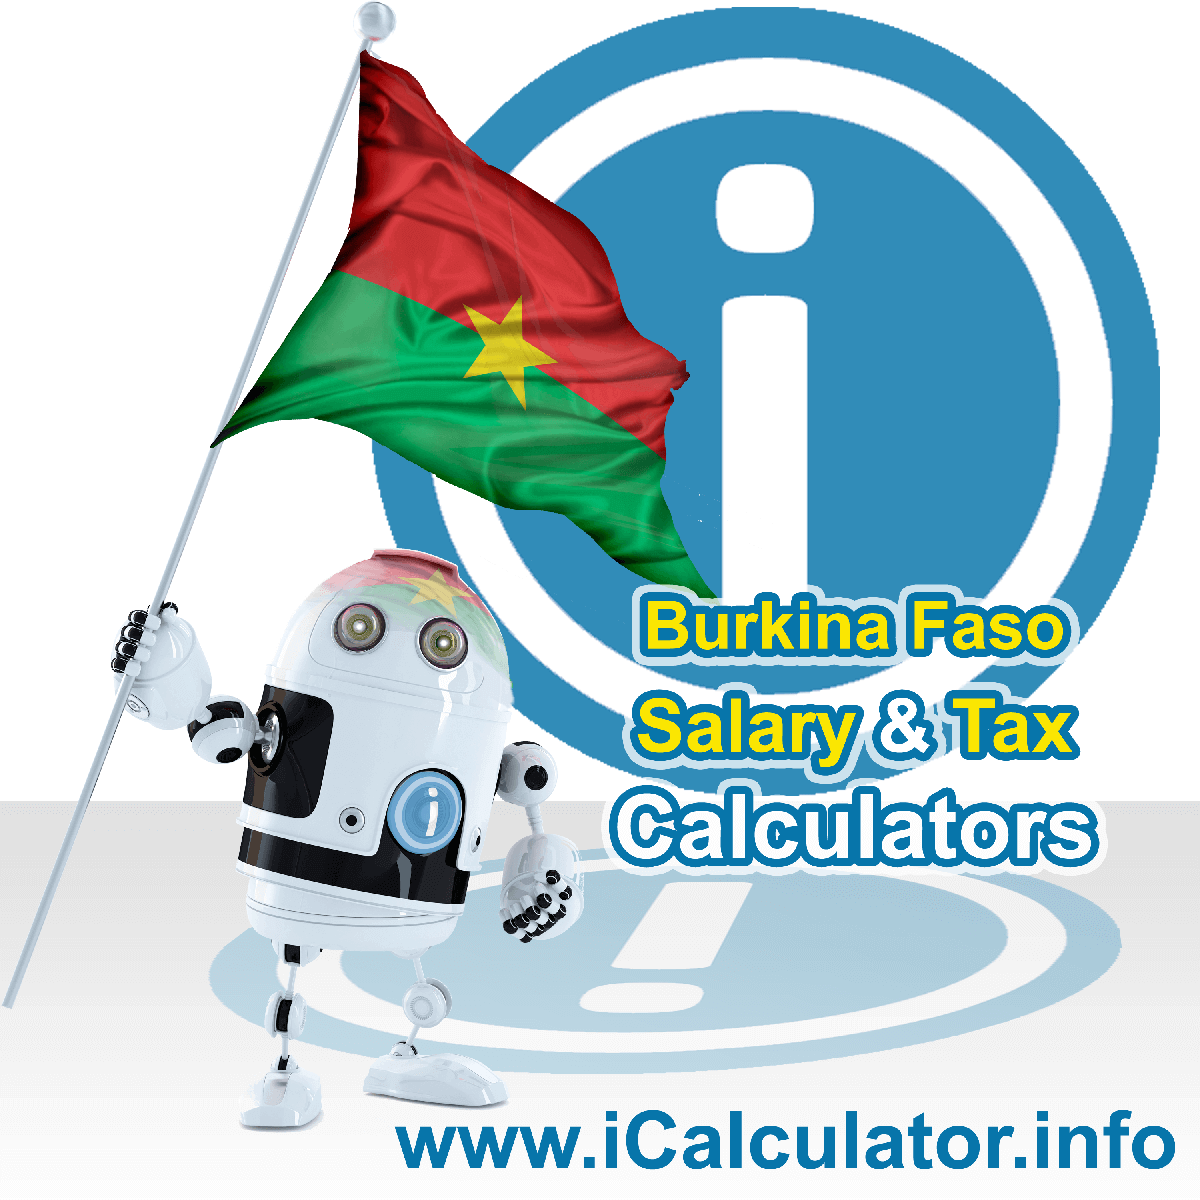 Burkina Faso Tax Calculator. This image shows the Burkina Faso flag and information relating to the tax formula for the Burkina Faso Salary Calculator